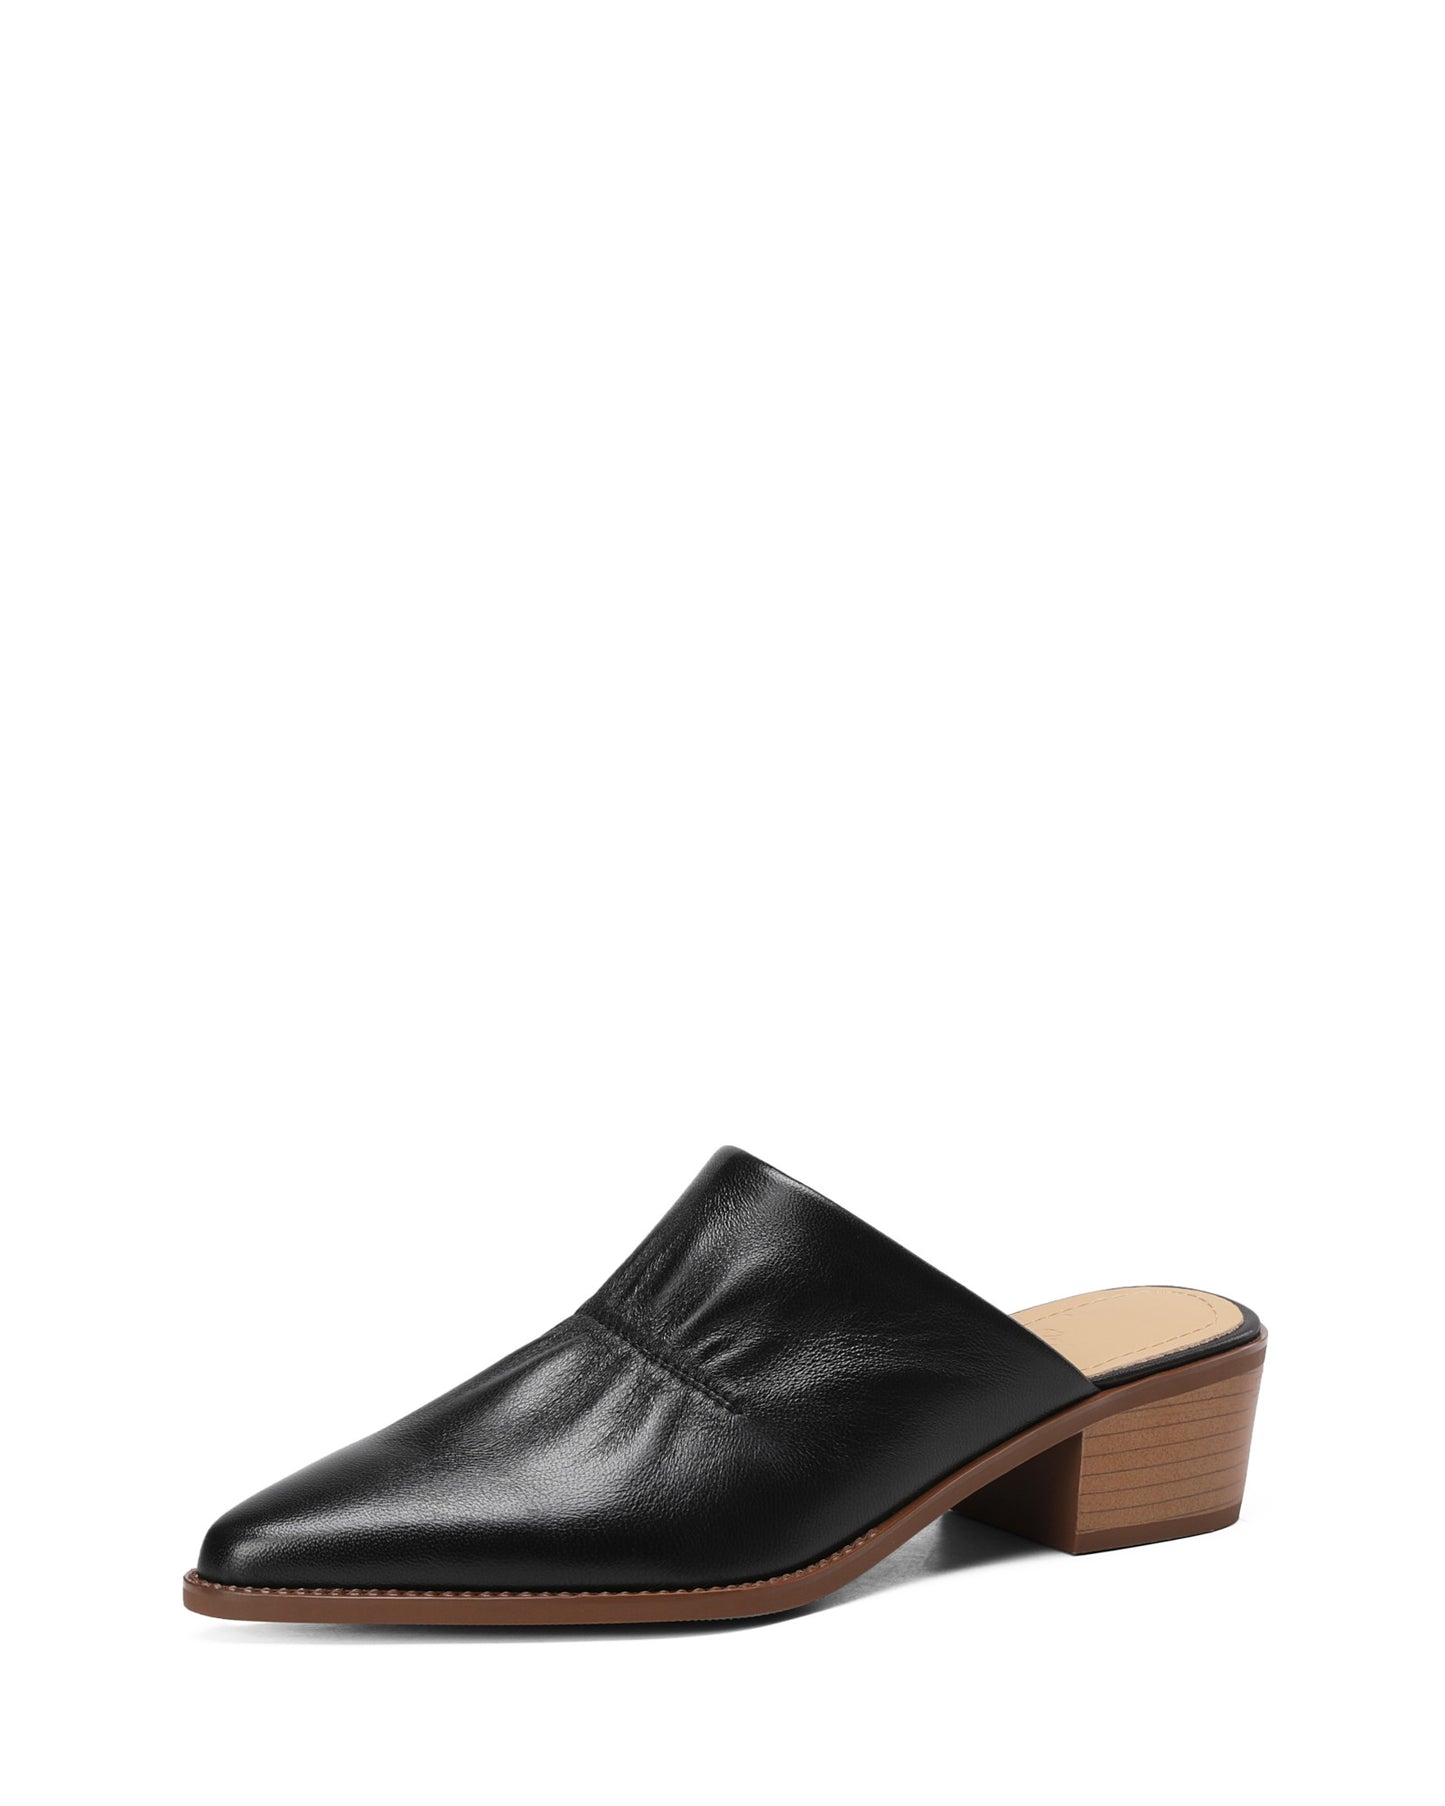 Saff-Black-Ruched-Leather-Mules